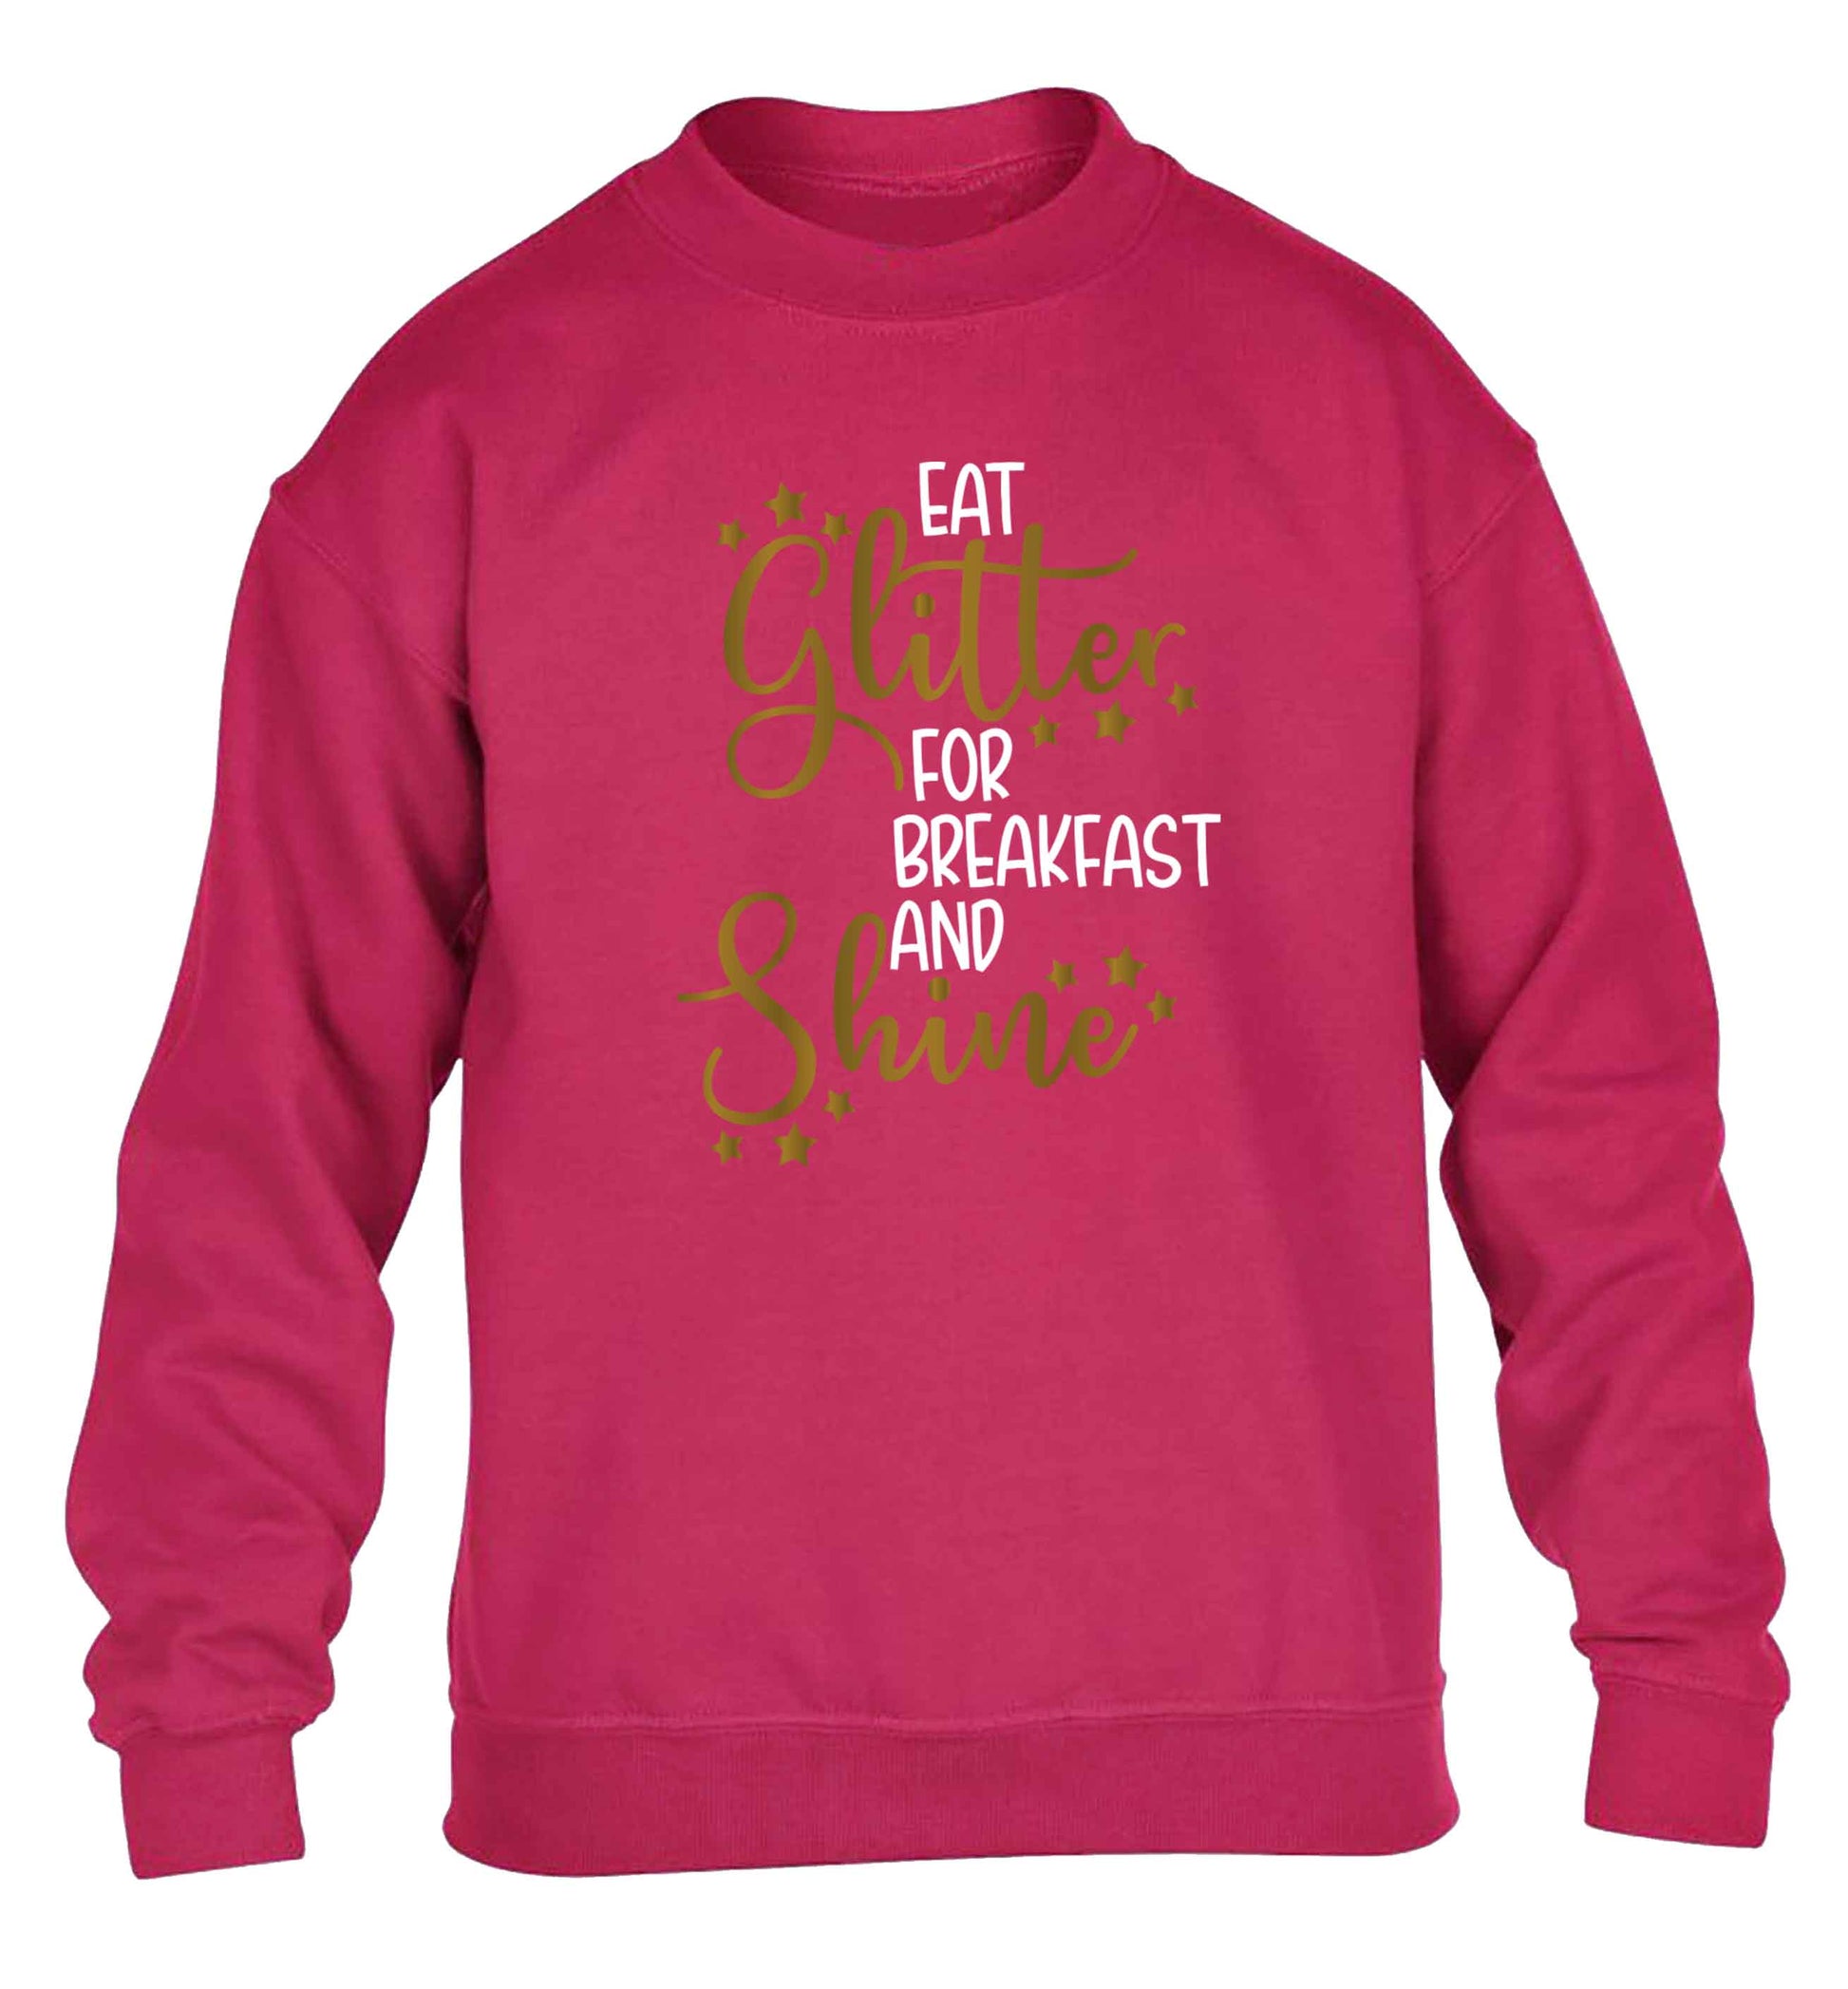 Eat glitter for breakfast and shine all day children's pink sweater 12-13 Years